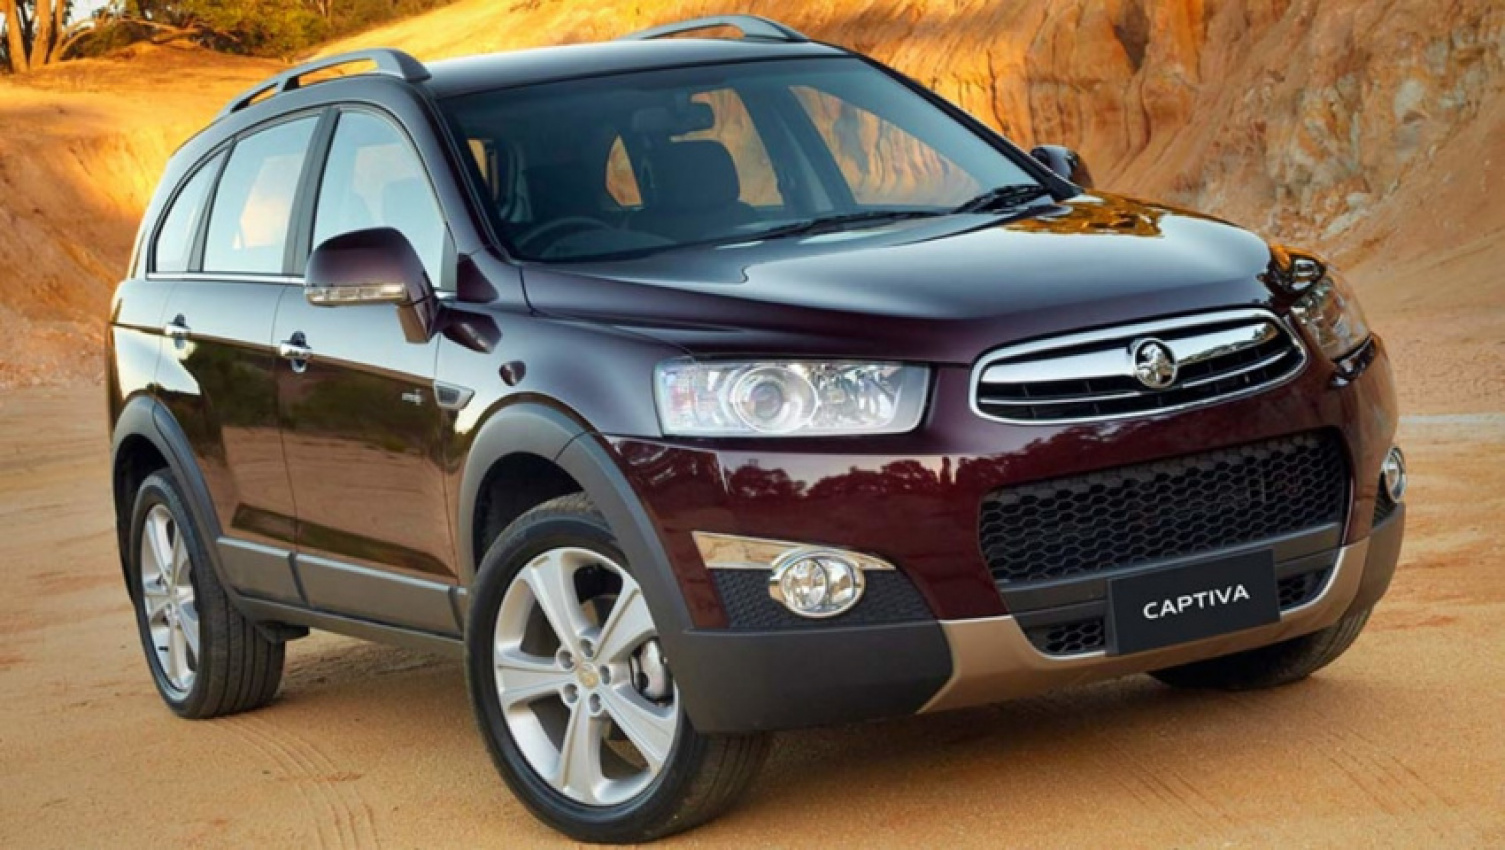 autos, cars, holden, reviews, buying tips, holden captiva, holden captiva 2006, holden captiva 2007, holden captiva 2008, holden captiva 2009, holden captiva 2010, holden captiva 2011, holden captiva 2012, holden captiva 2013, holden captiva 2014, holden captiva 2015, holden captiva 2016, holden captiva 2017, holden captiva reviews, holden people mover range, holden reviews, holden suv range, people mover, used car reviews, used holden captiva review: 2006-2017